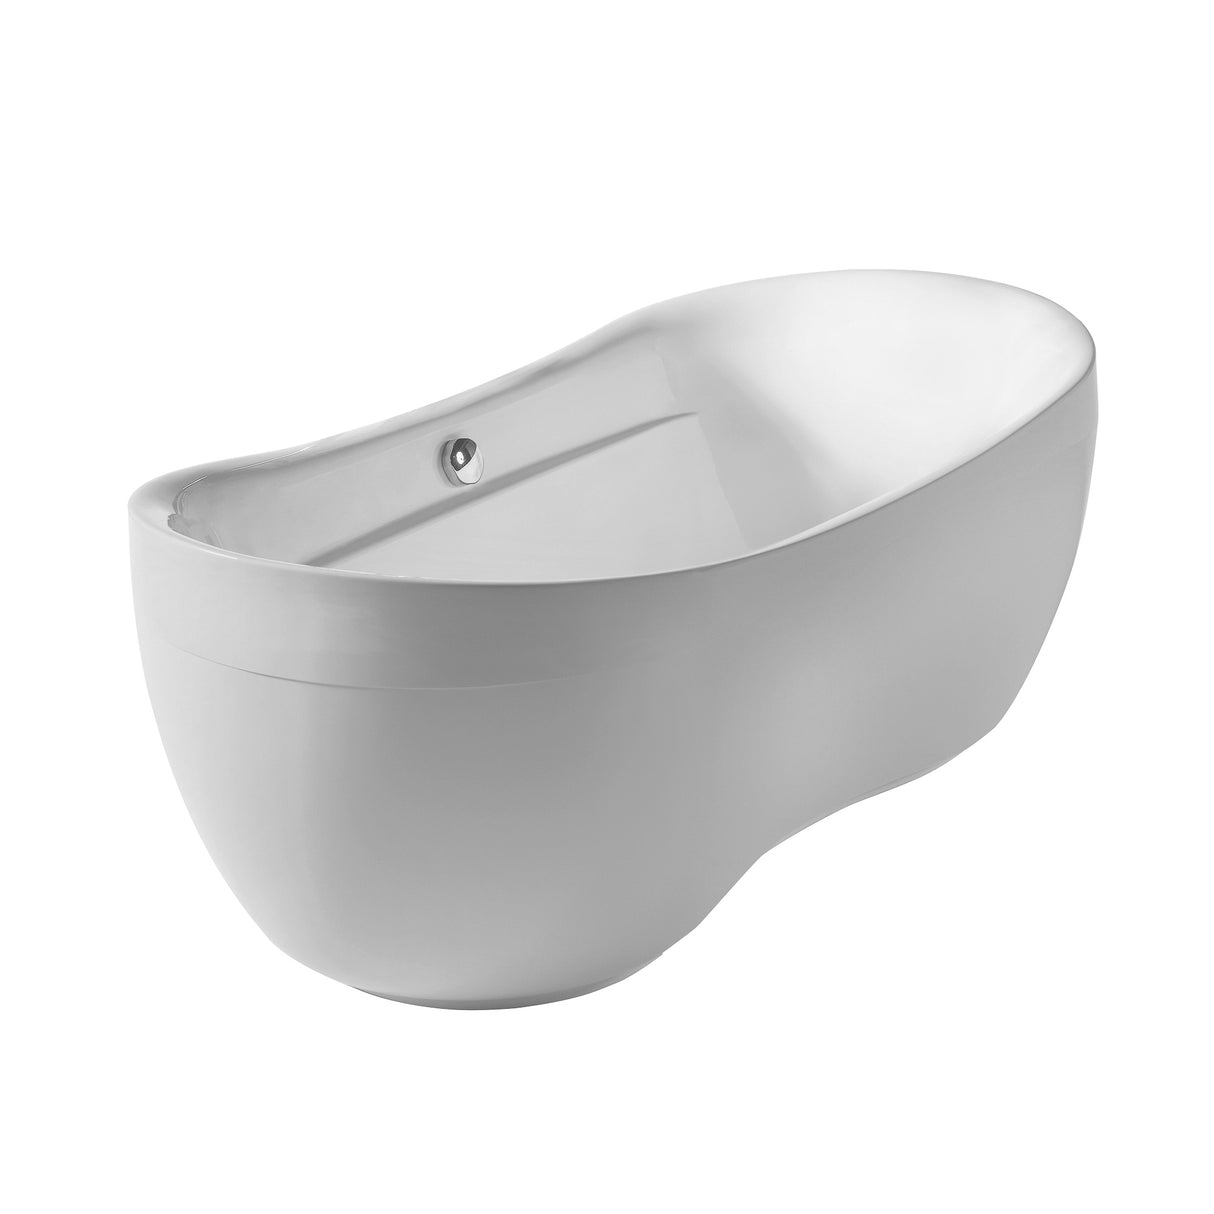 Bathhaus Oval Double Ended Lucite Acrylic Freestanding Bathtub with Curved Rim and a chrome mechanical pop-up waste and chrome center drain with internal overflow